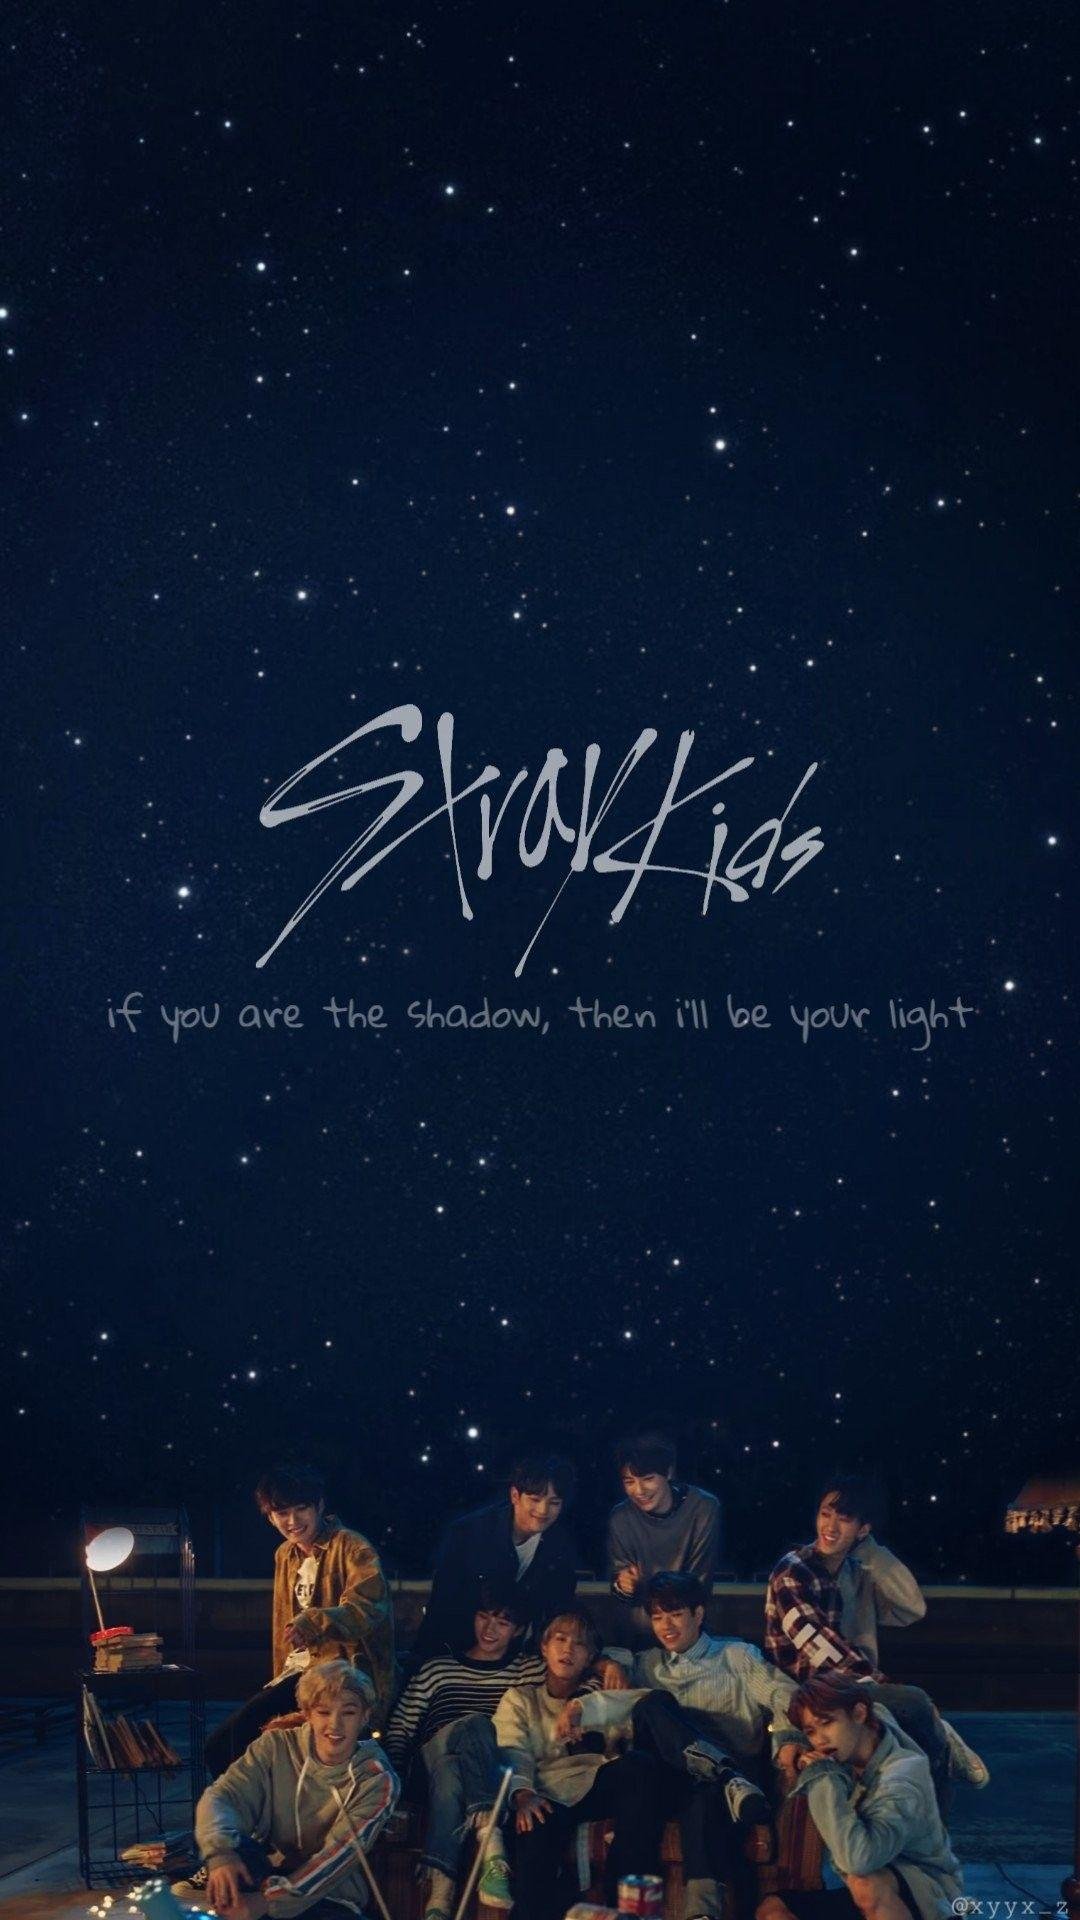 Share more than 51 stray kids wallpaper best - in.cdgdbentre